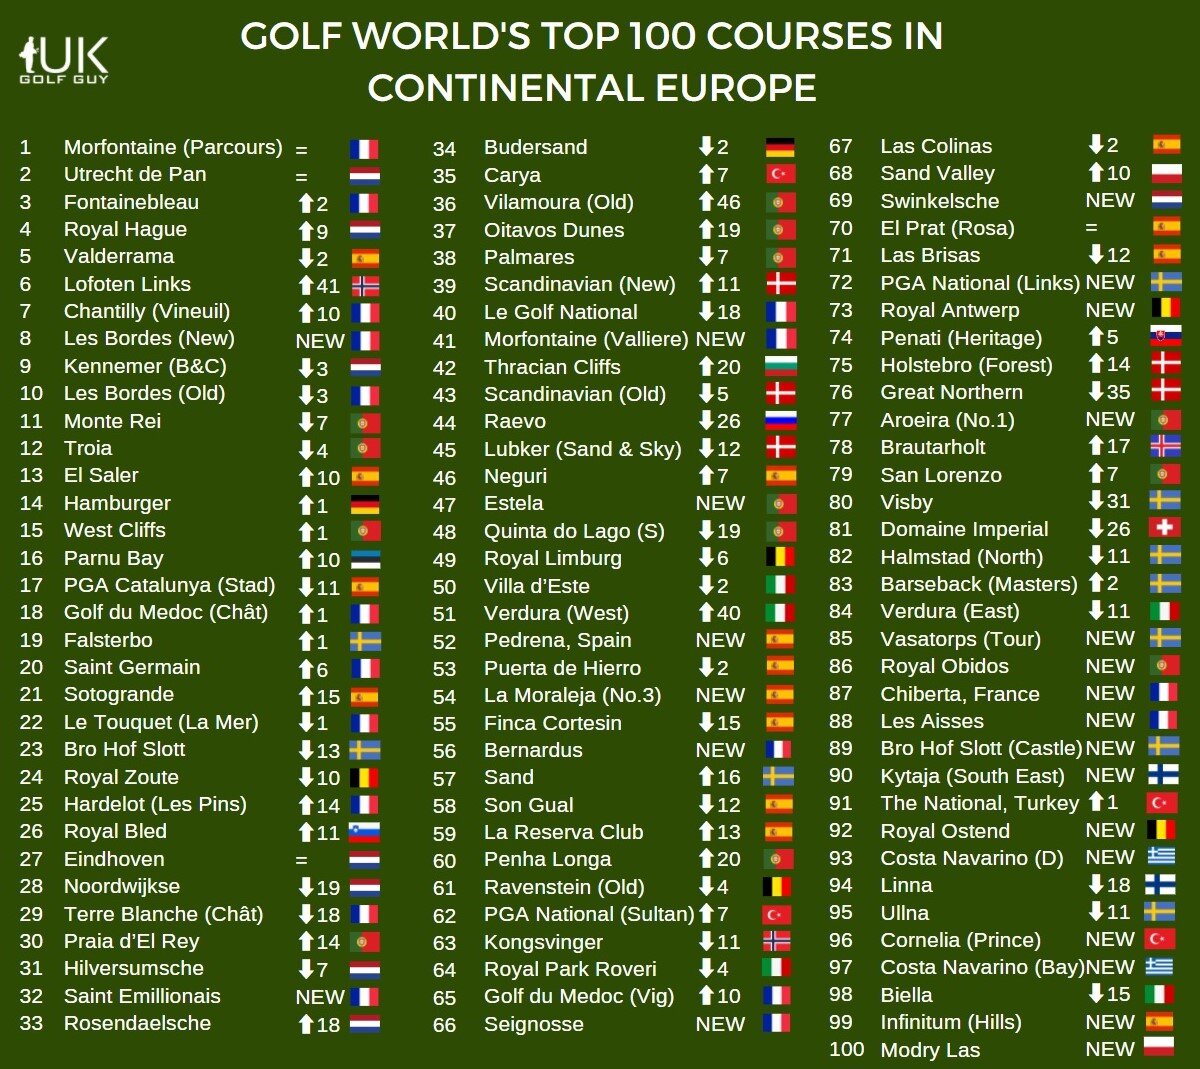 Is this the best Continental Europe Top 100 list ever? — UK Golf Guy